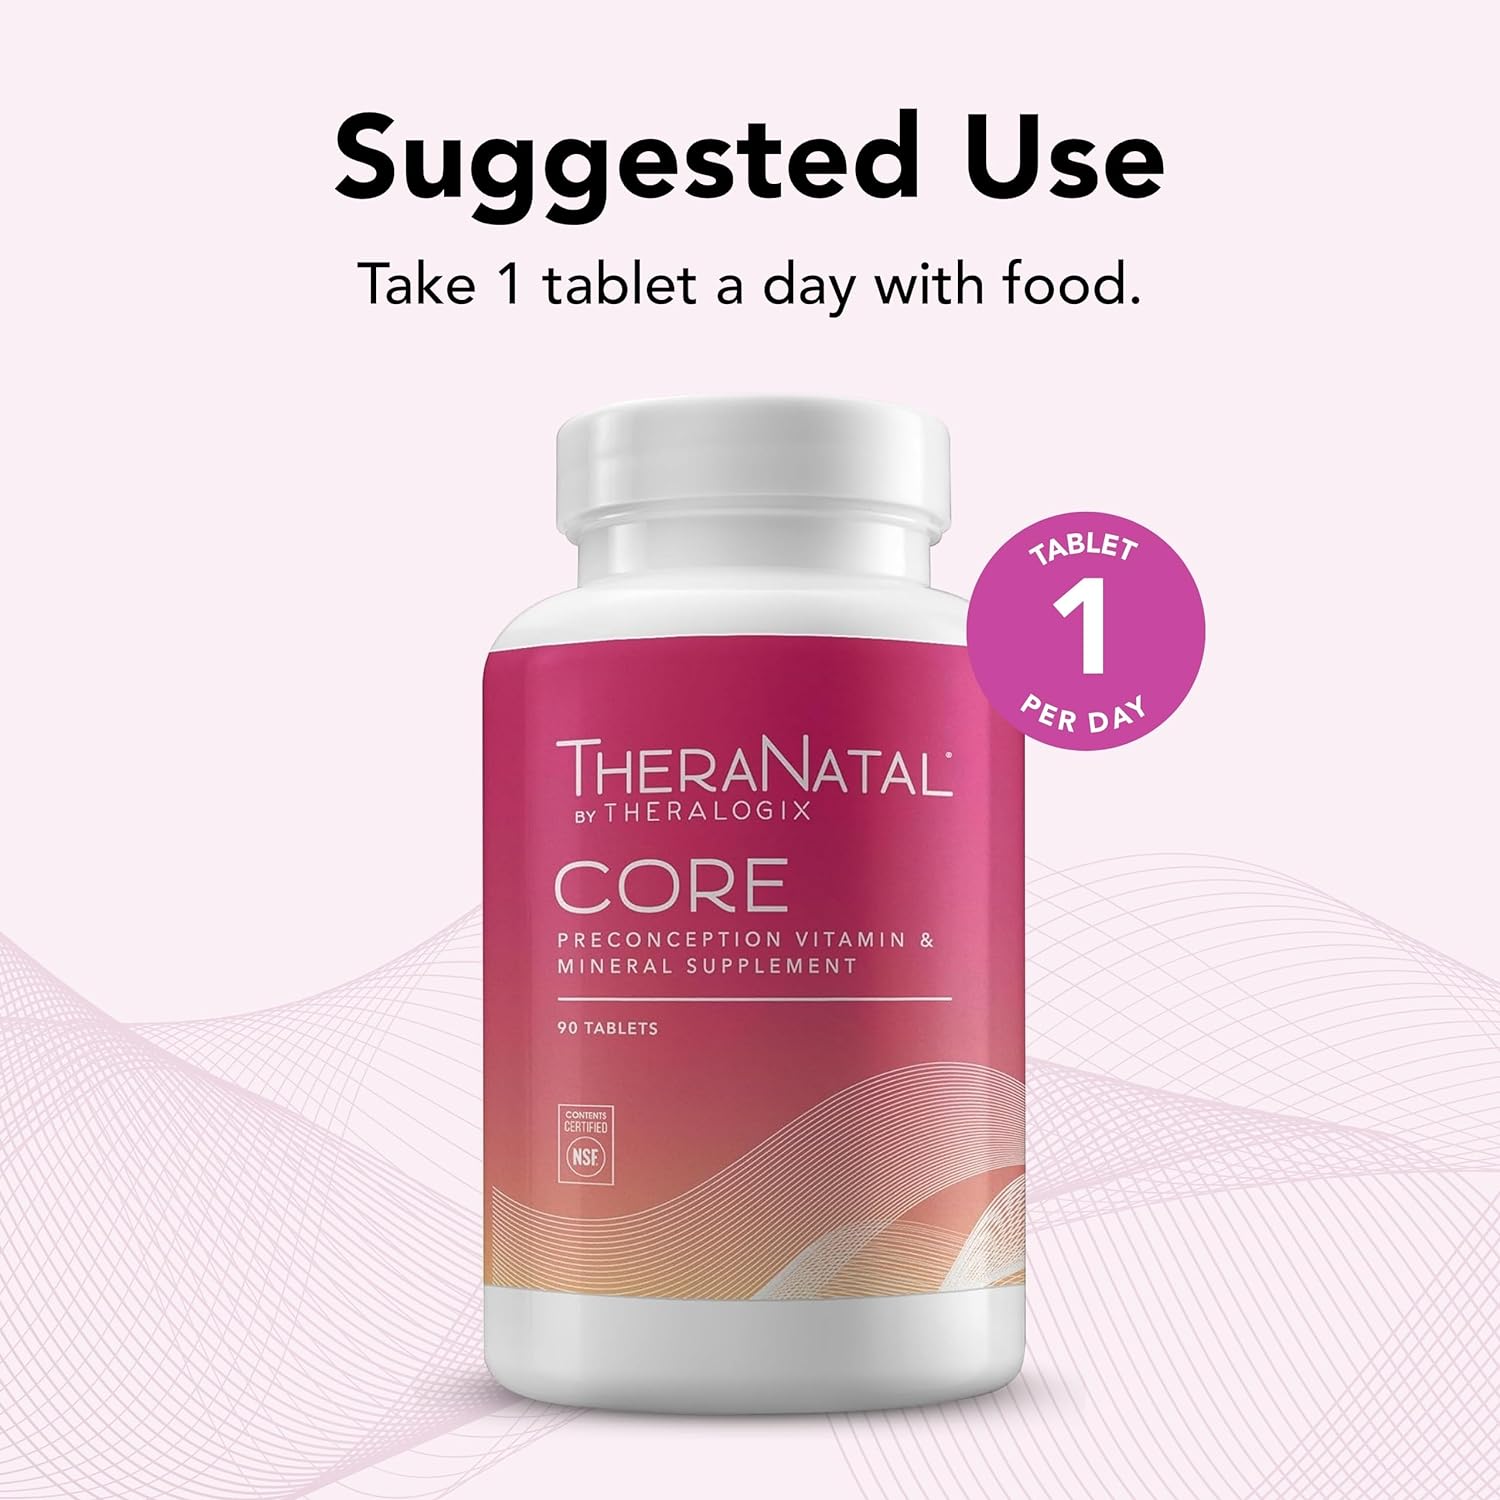 Theralogix TheraNatal Core Preconception Vitamin Supplement - 90-Day Supply - Fertility Support Supplement with Folate, Vitamin D3, Choline & More* - NSF Certified - 90 Tablets : Health & Household